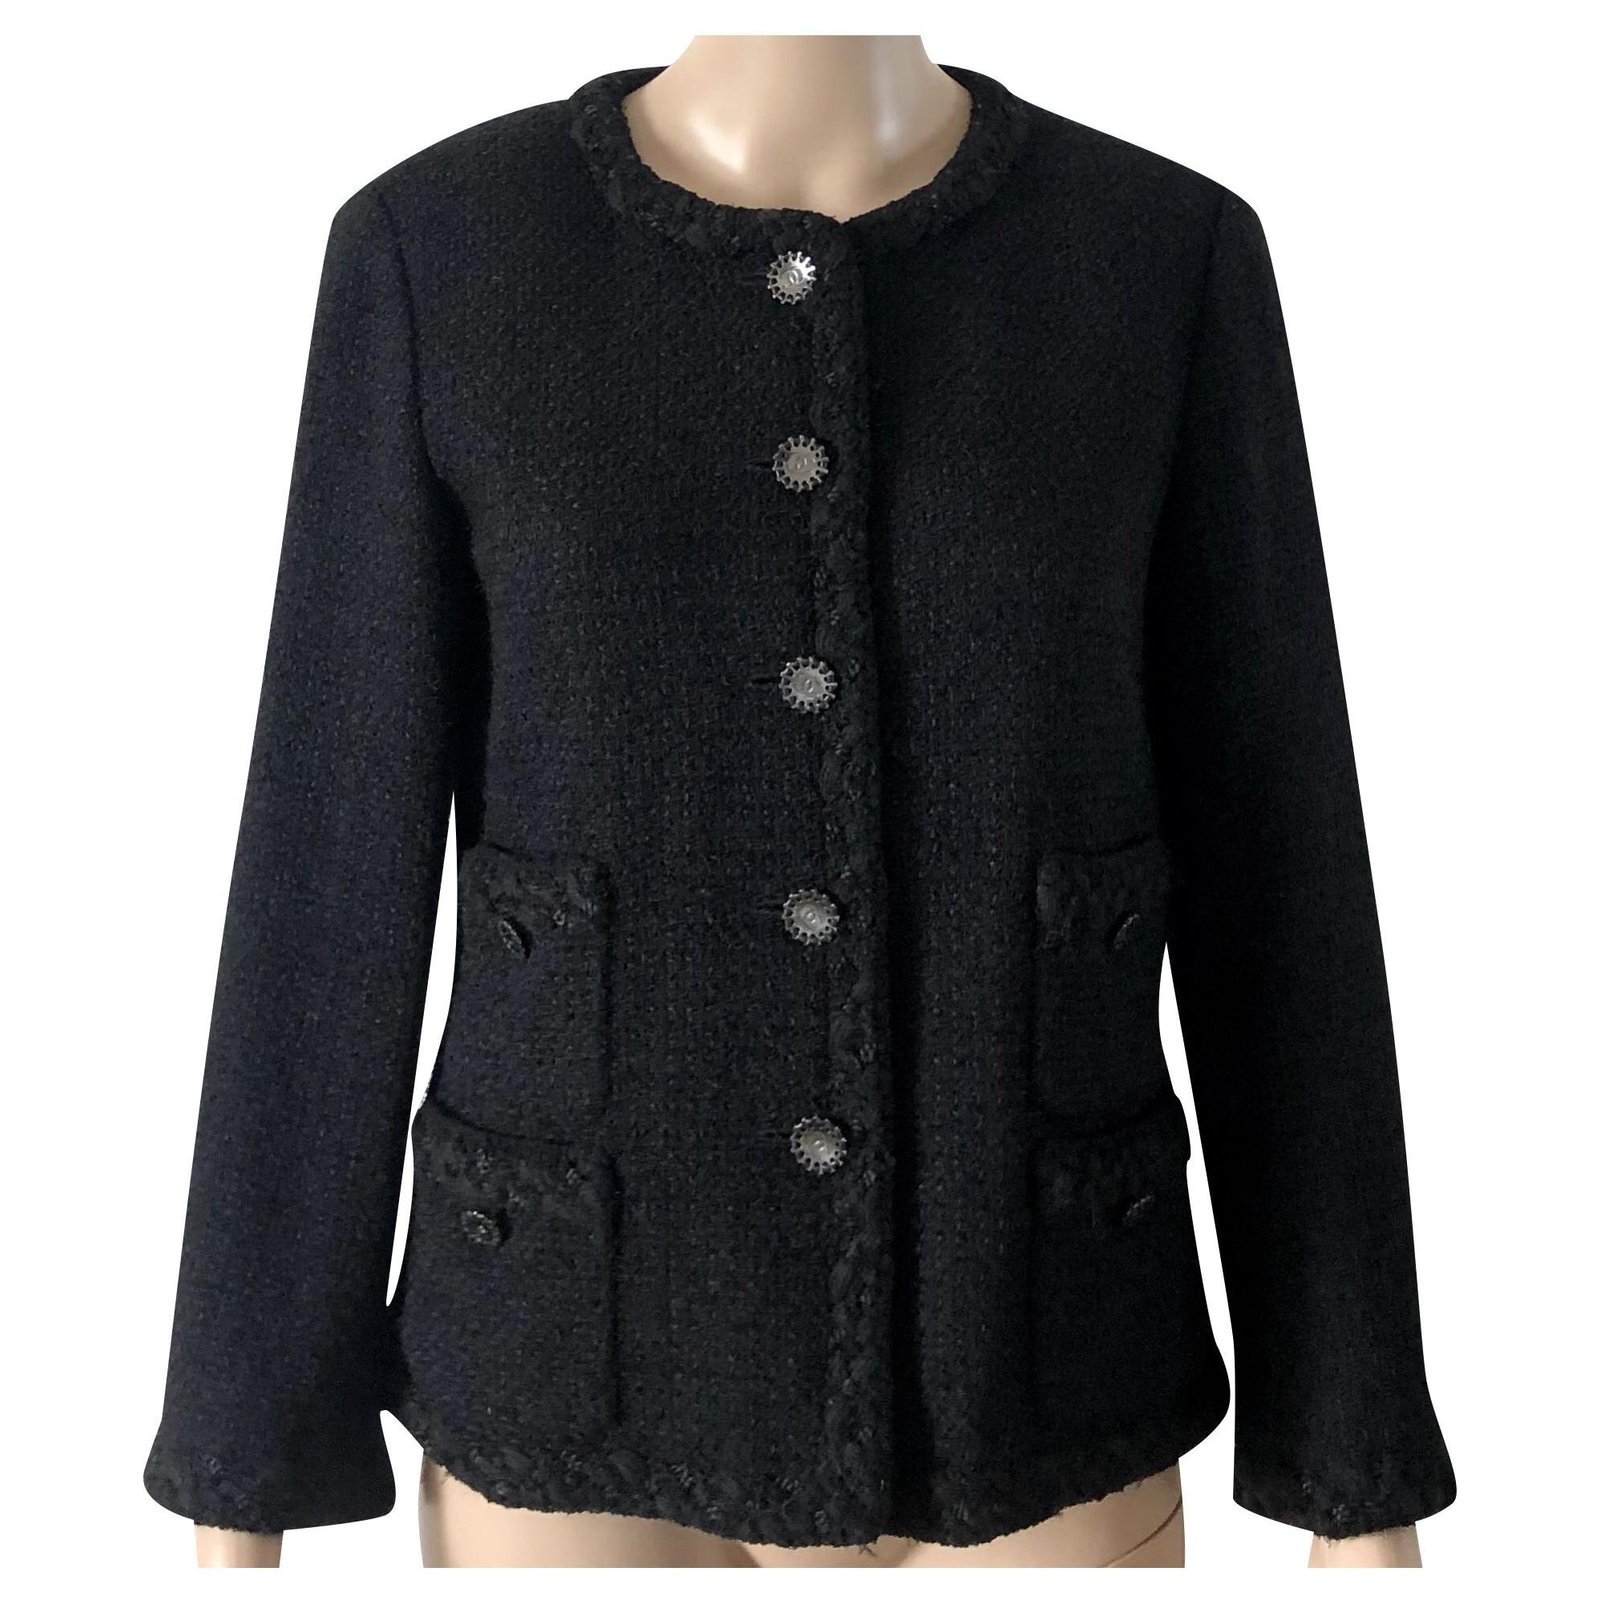 Chanel, The Little Black Jacket: Chanel' Auction